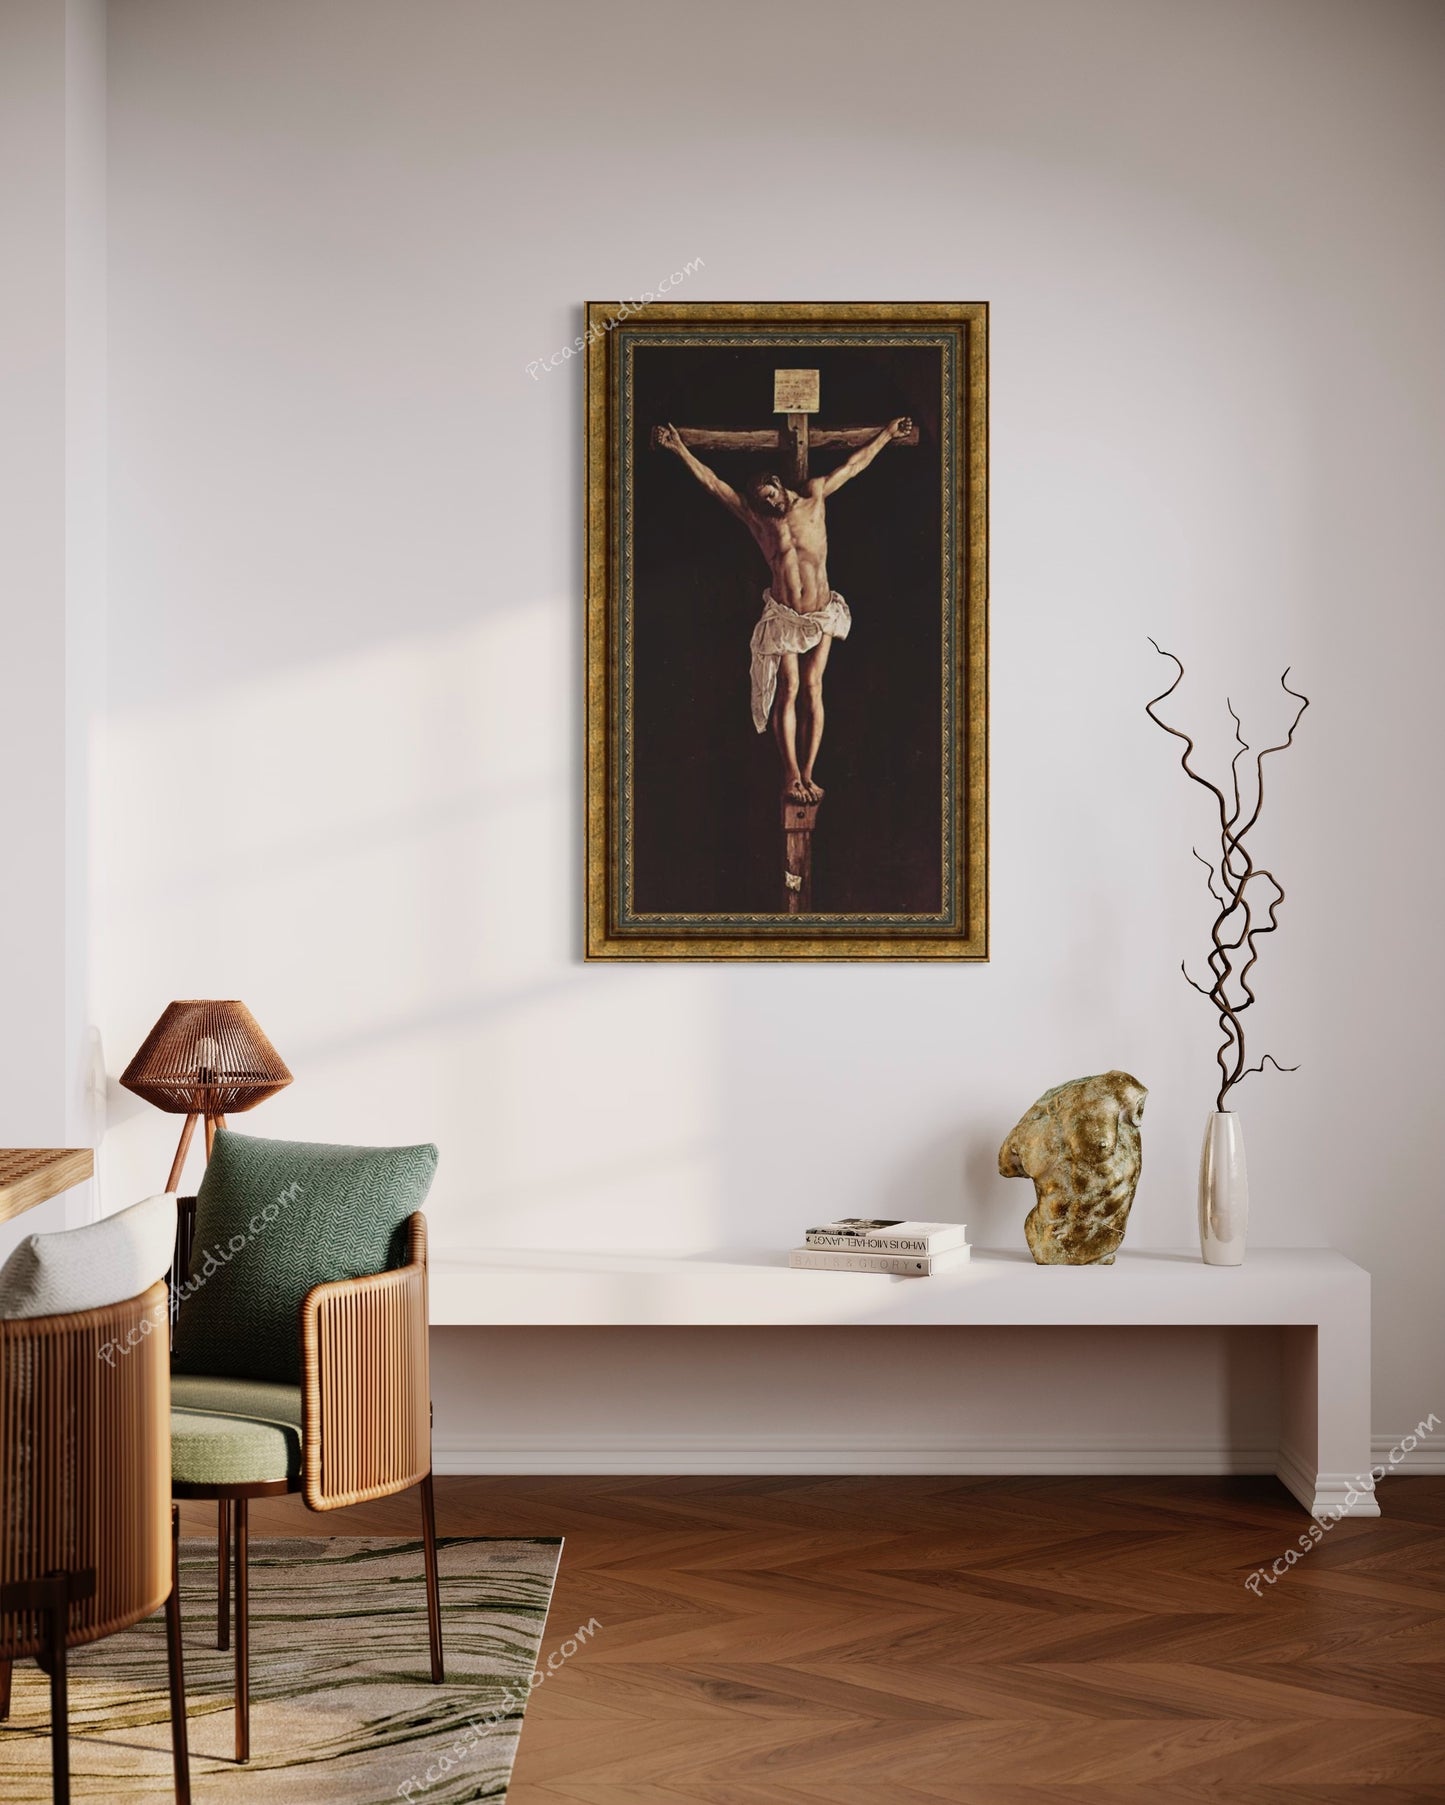 Christ on the Cross by Francisco de Zurbaran Oil Painting Hand Painted Art on Canvas Wall Decor Unframed